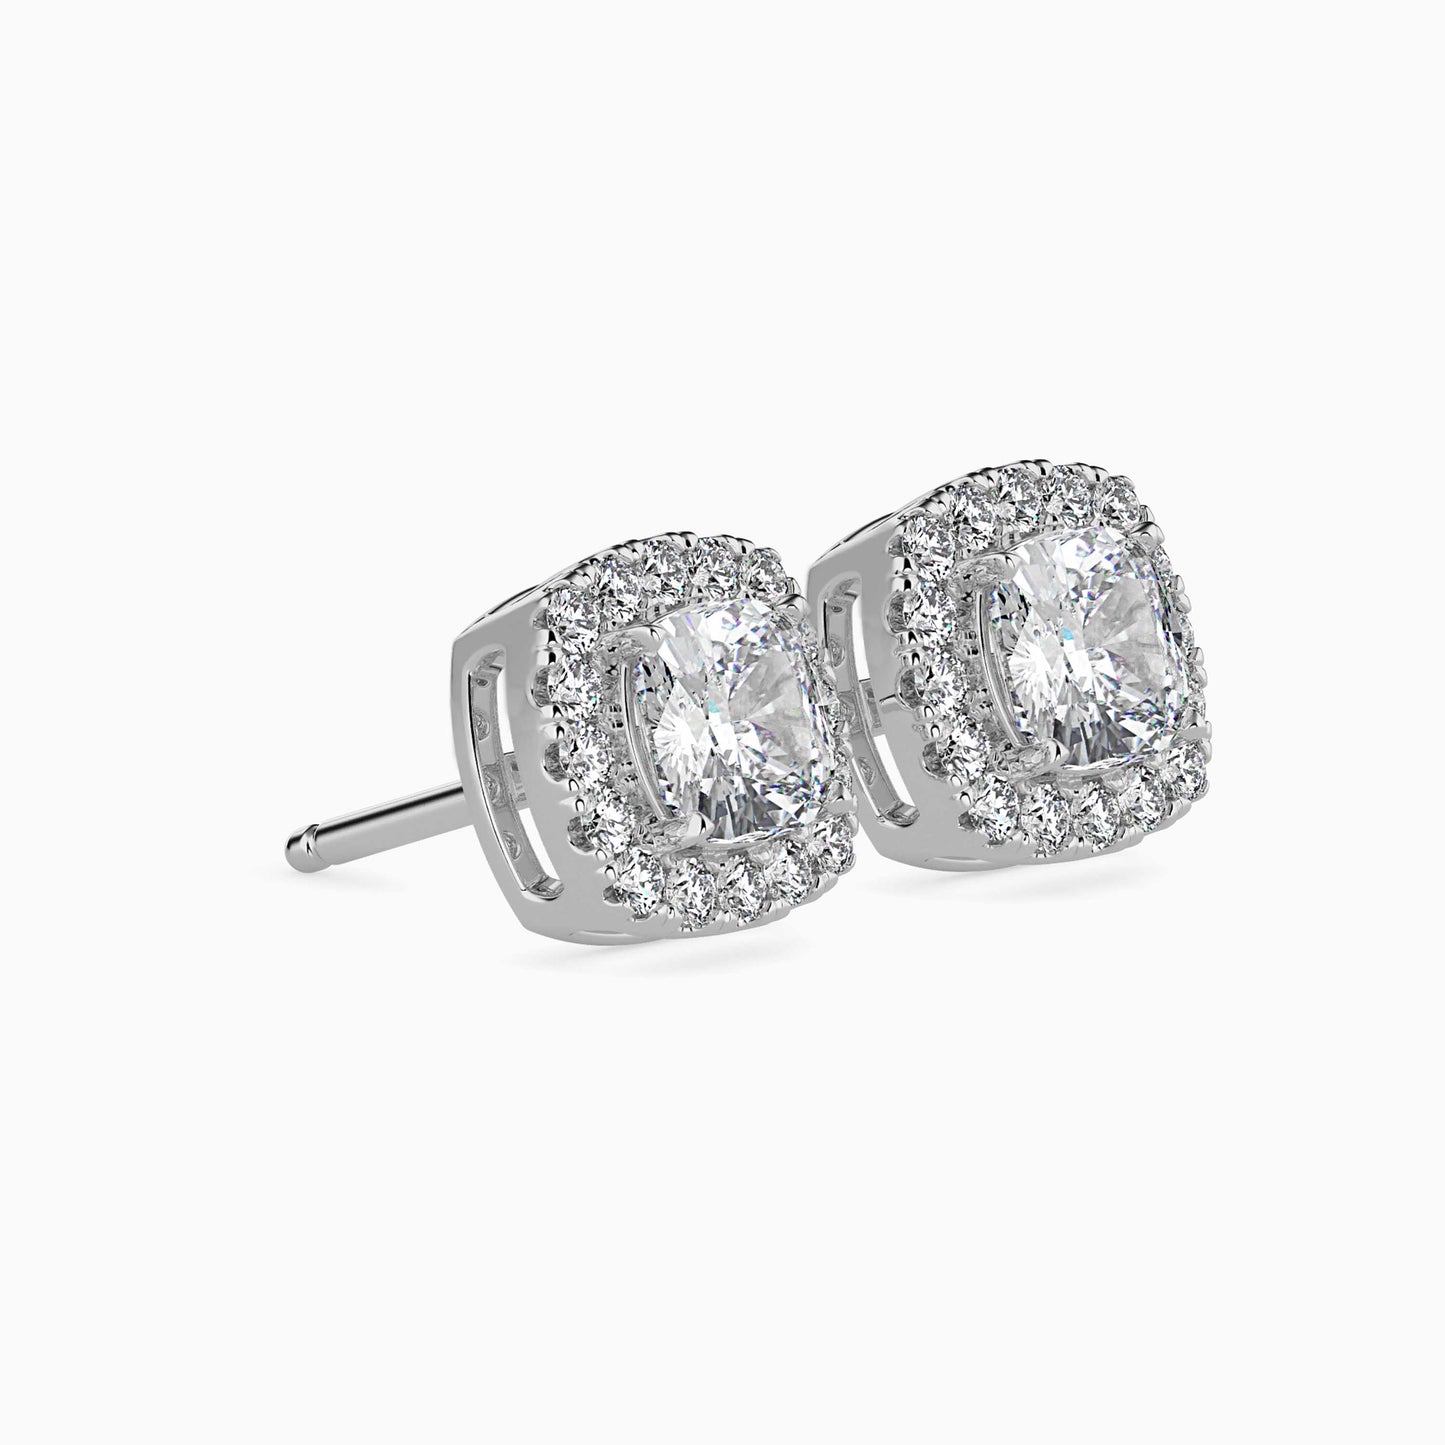 Starry Serenity Solitaire Earring